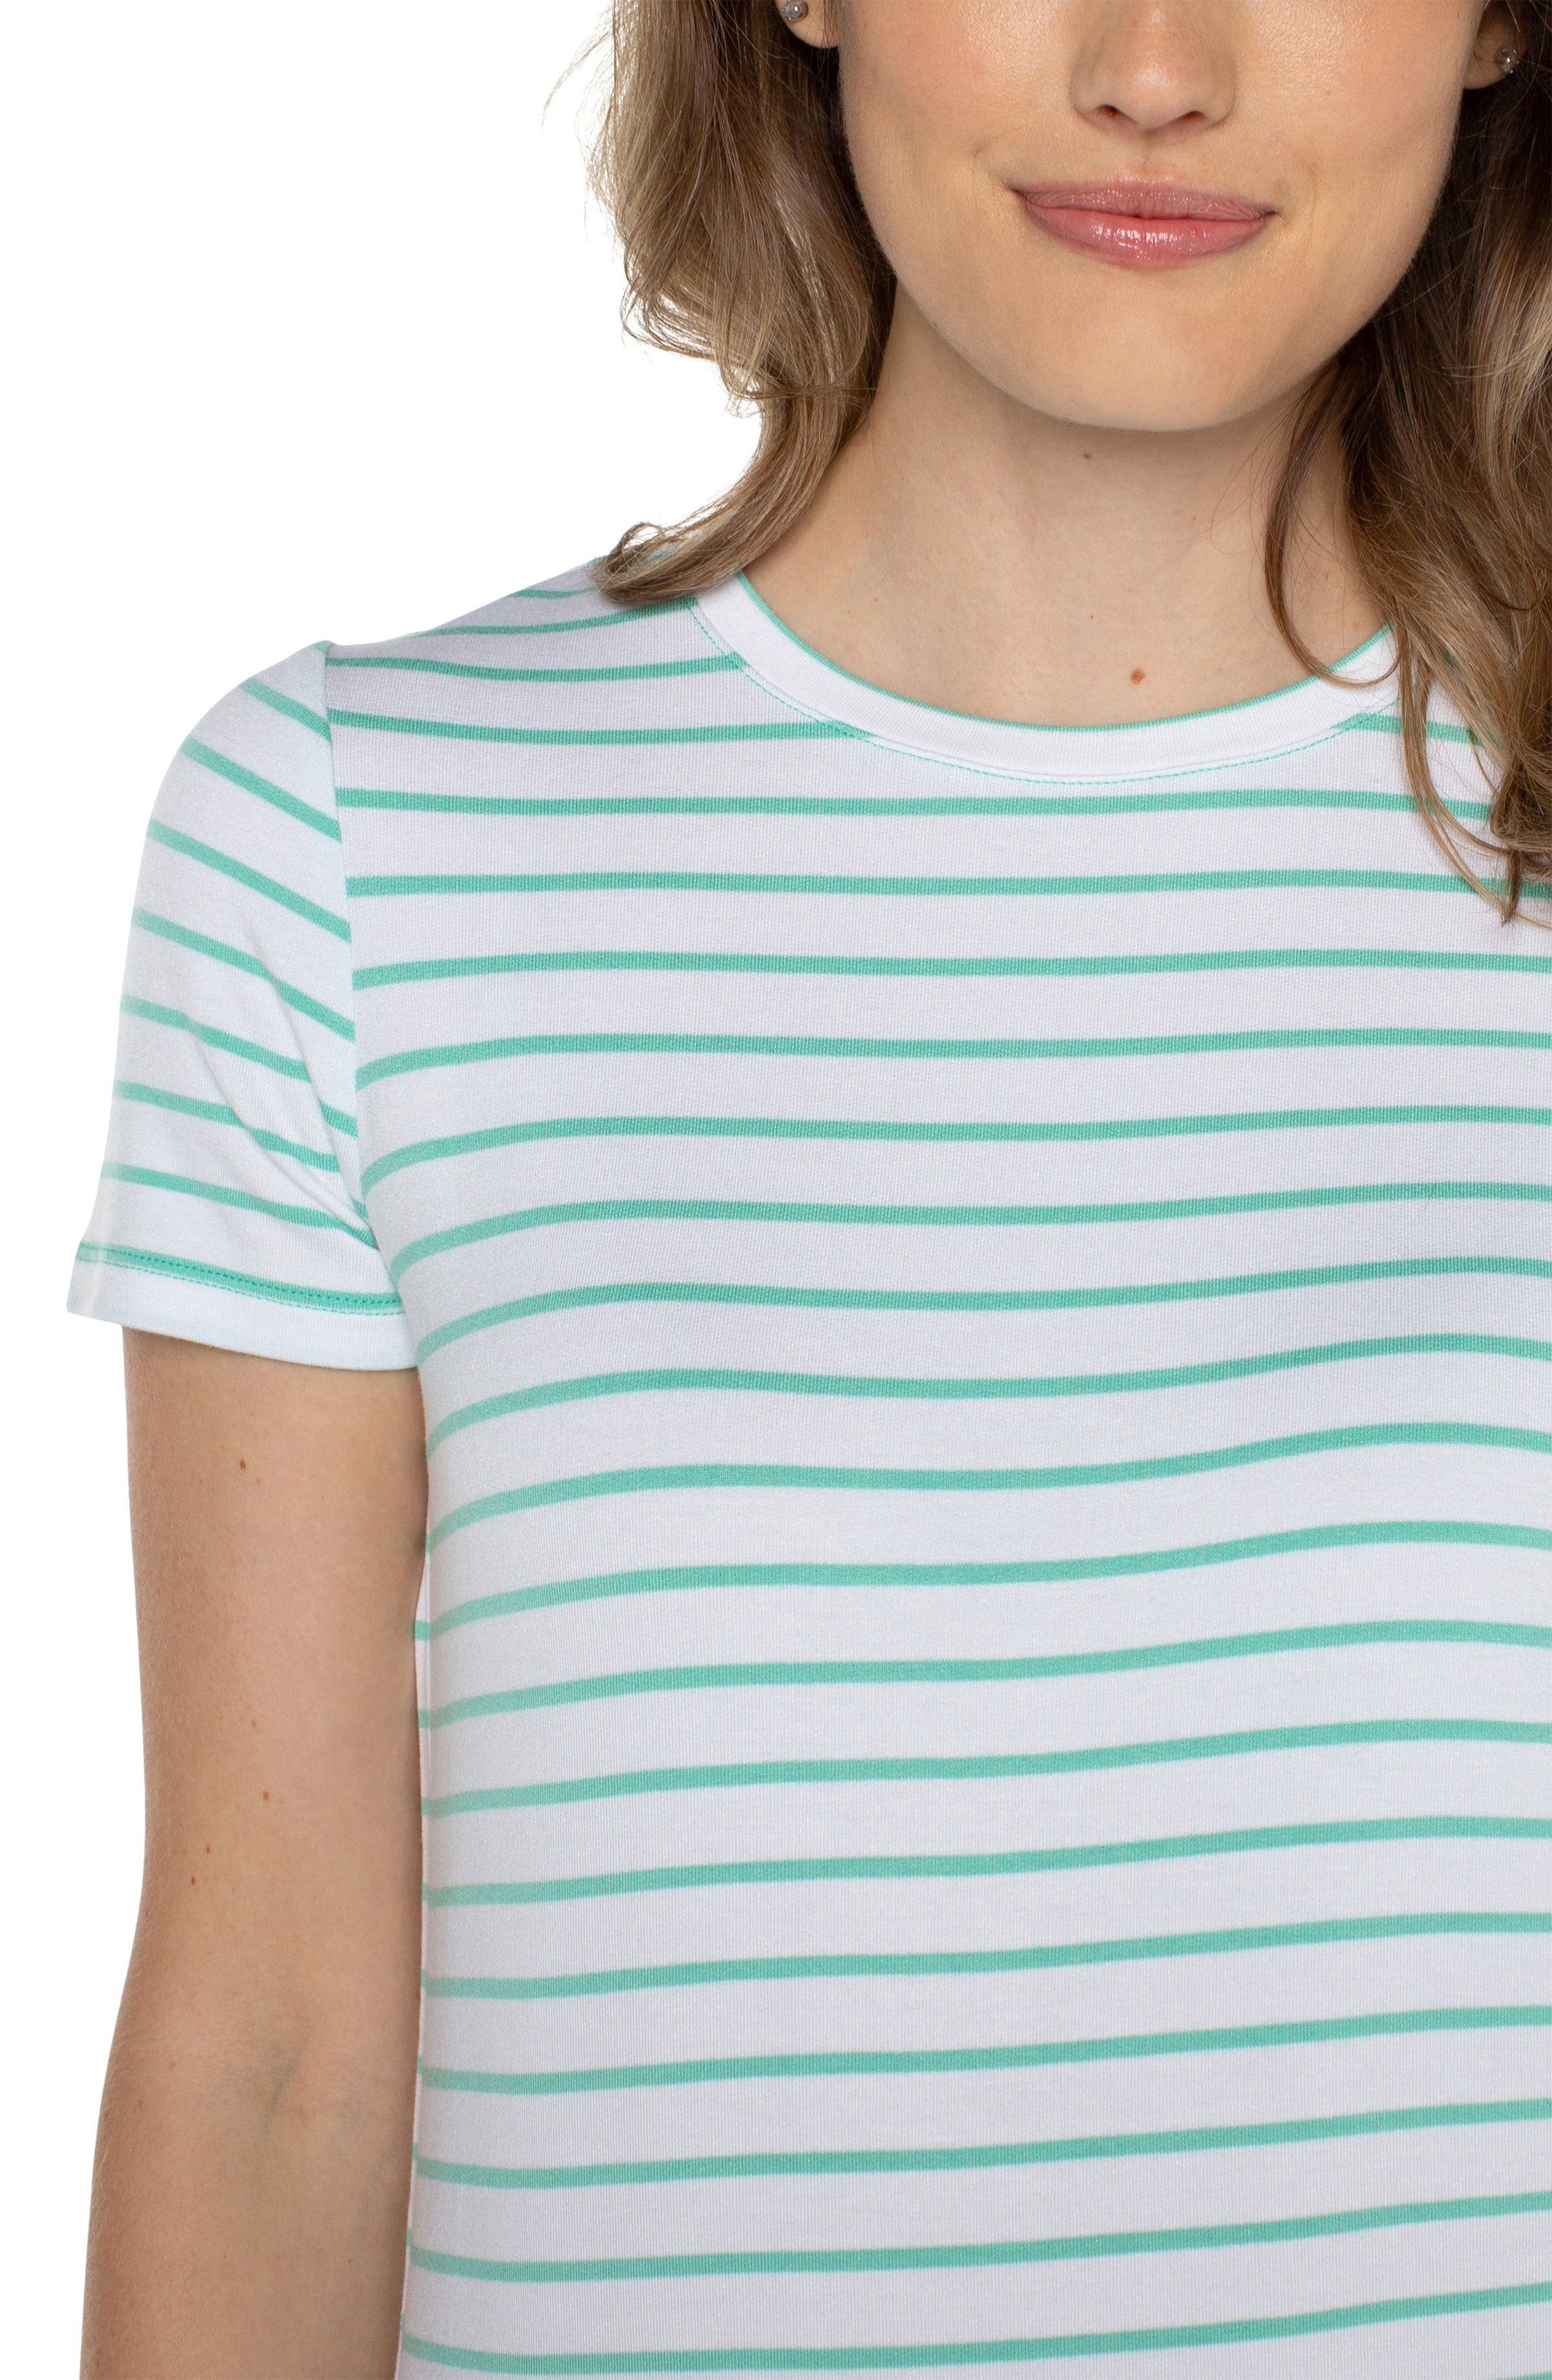 LVP Classic Crew short sleeve - white with mint stripe close up view